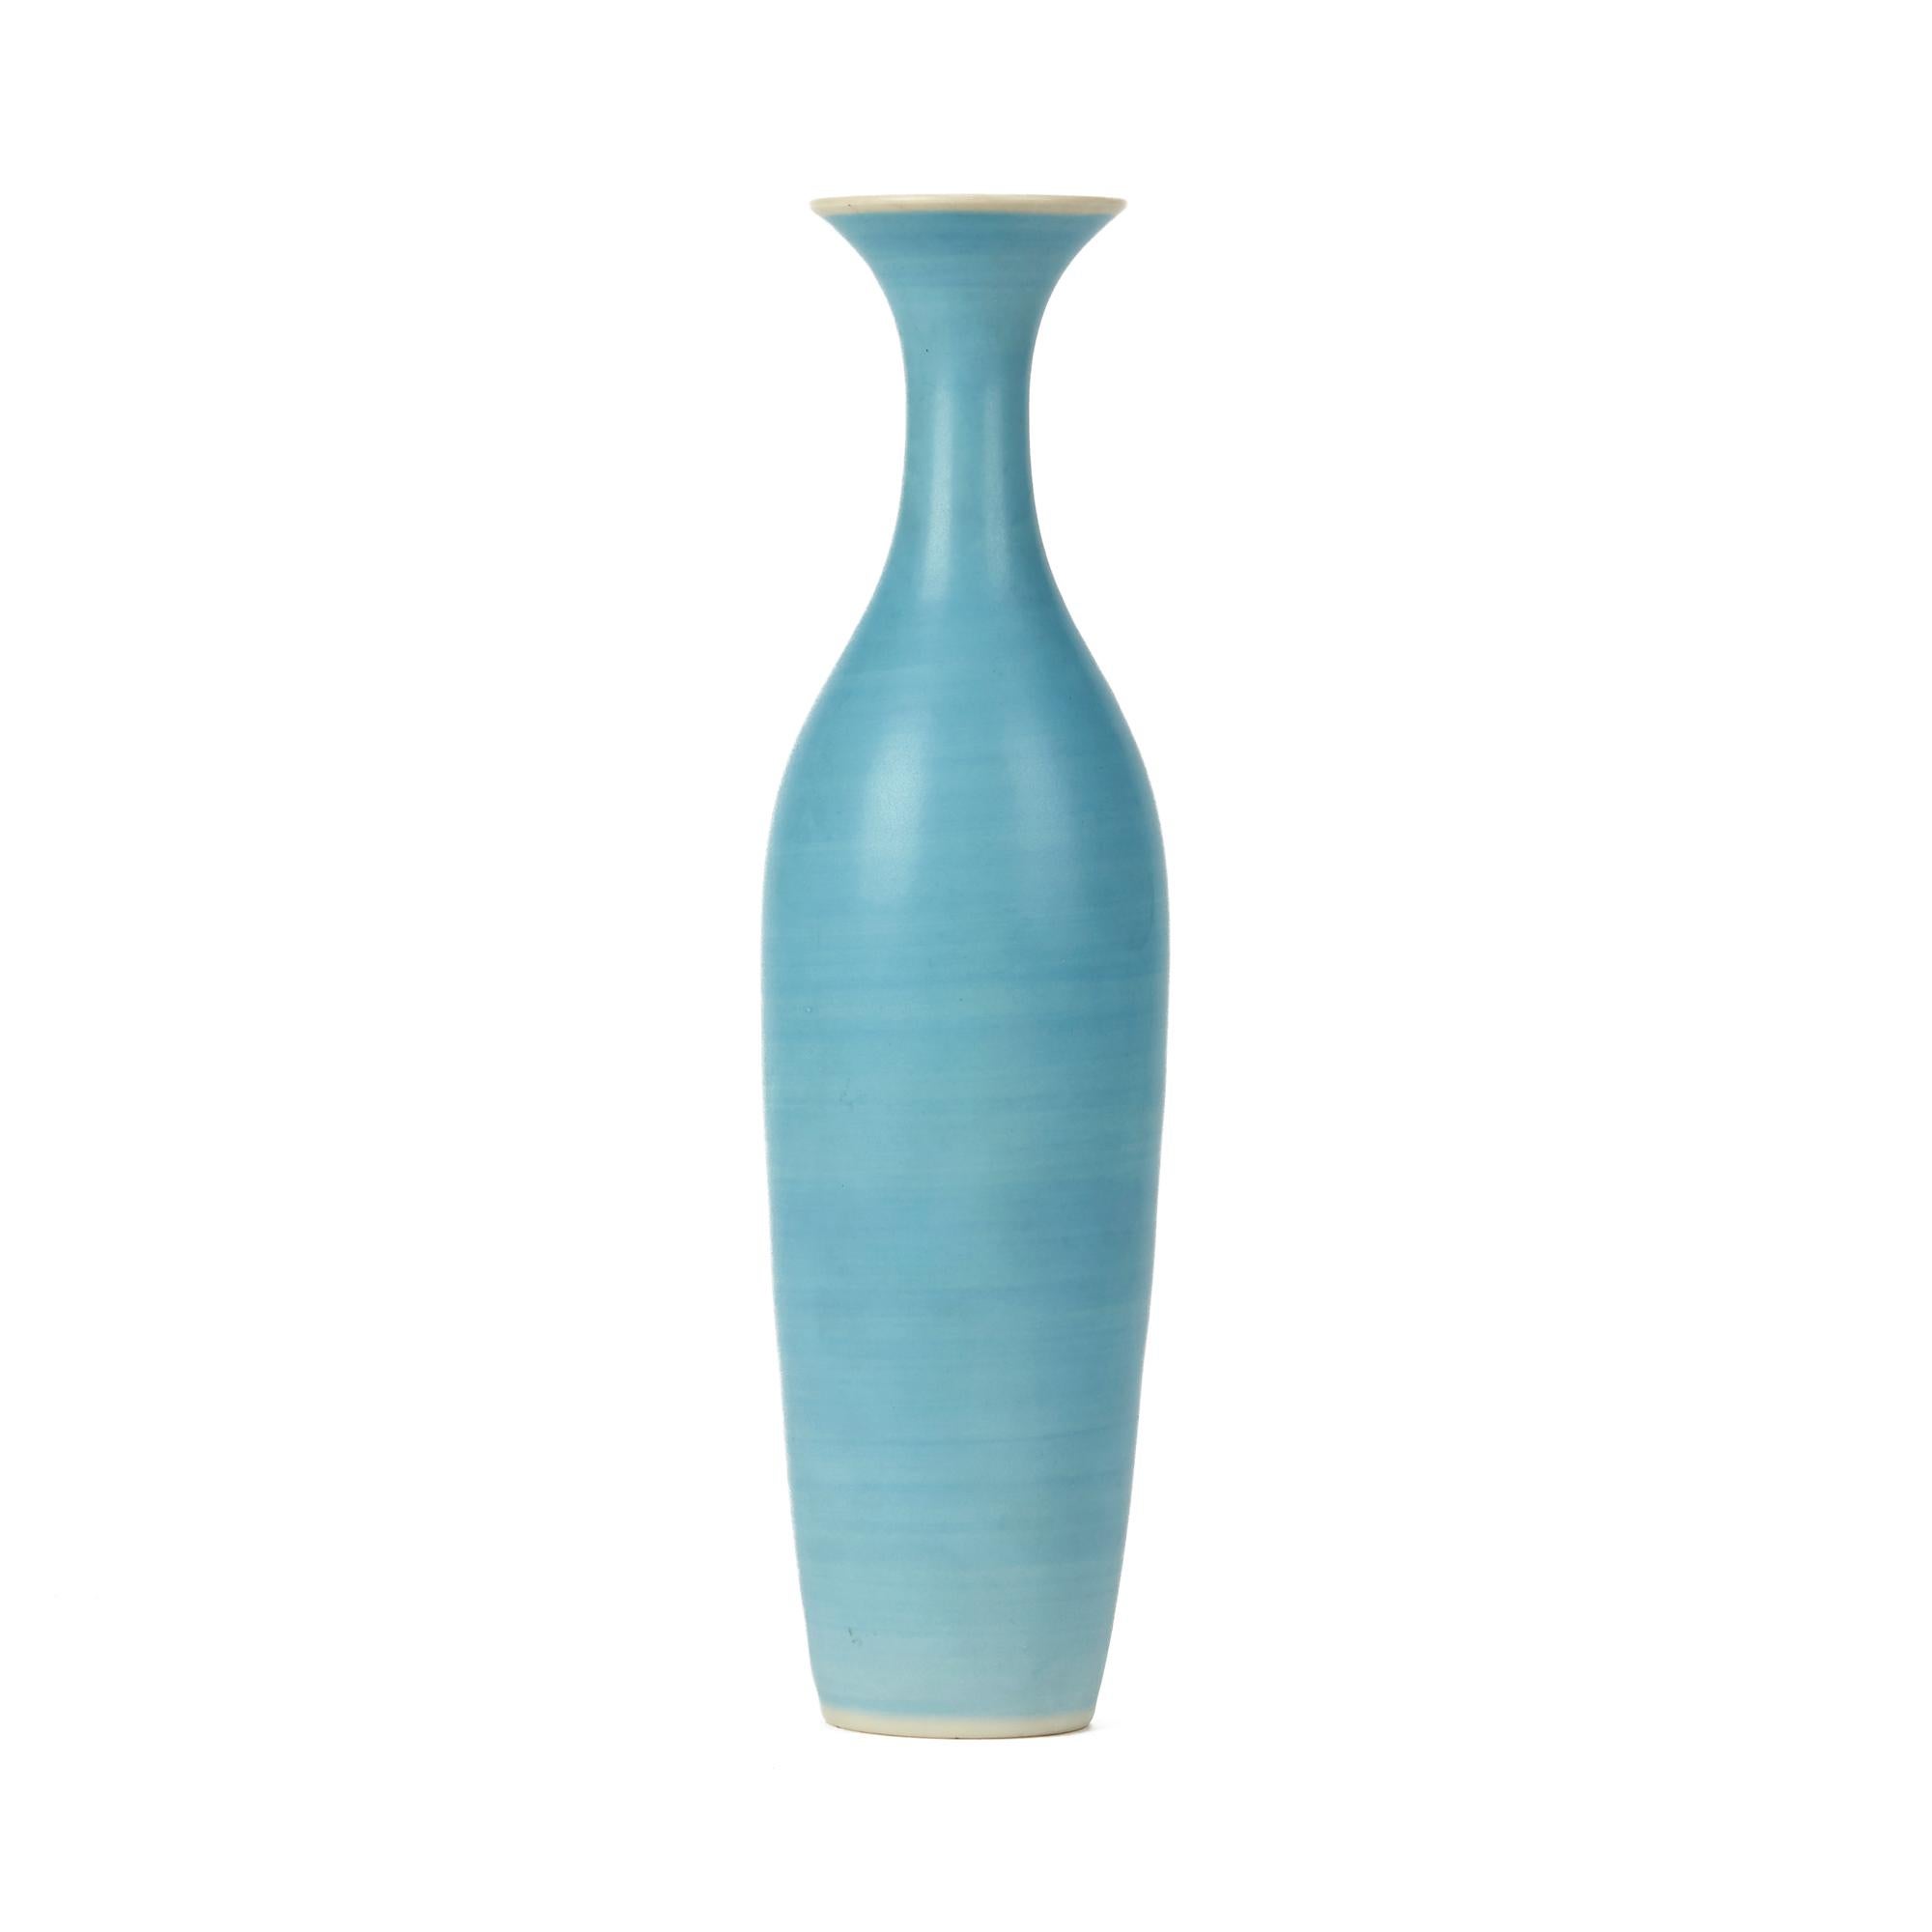 A very stylish vintage Danish porcelain bottle shaped vase decorated in powder blue glazes by Gunnar Nylund (1904-1997) and designed for Nymølle Keramiske Fabrik. This tall elegant vase has a streaked bright blue finish and has printed Nymølle and